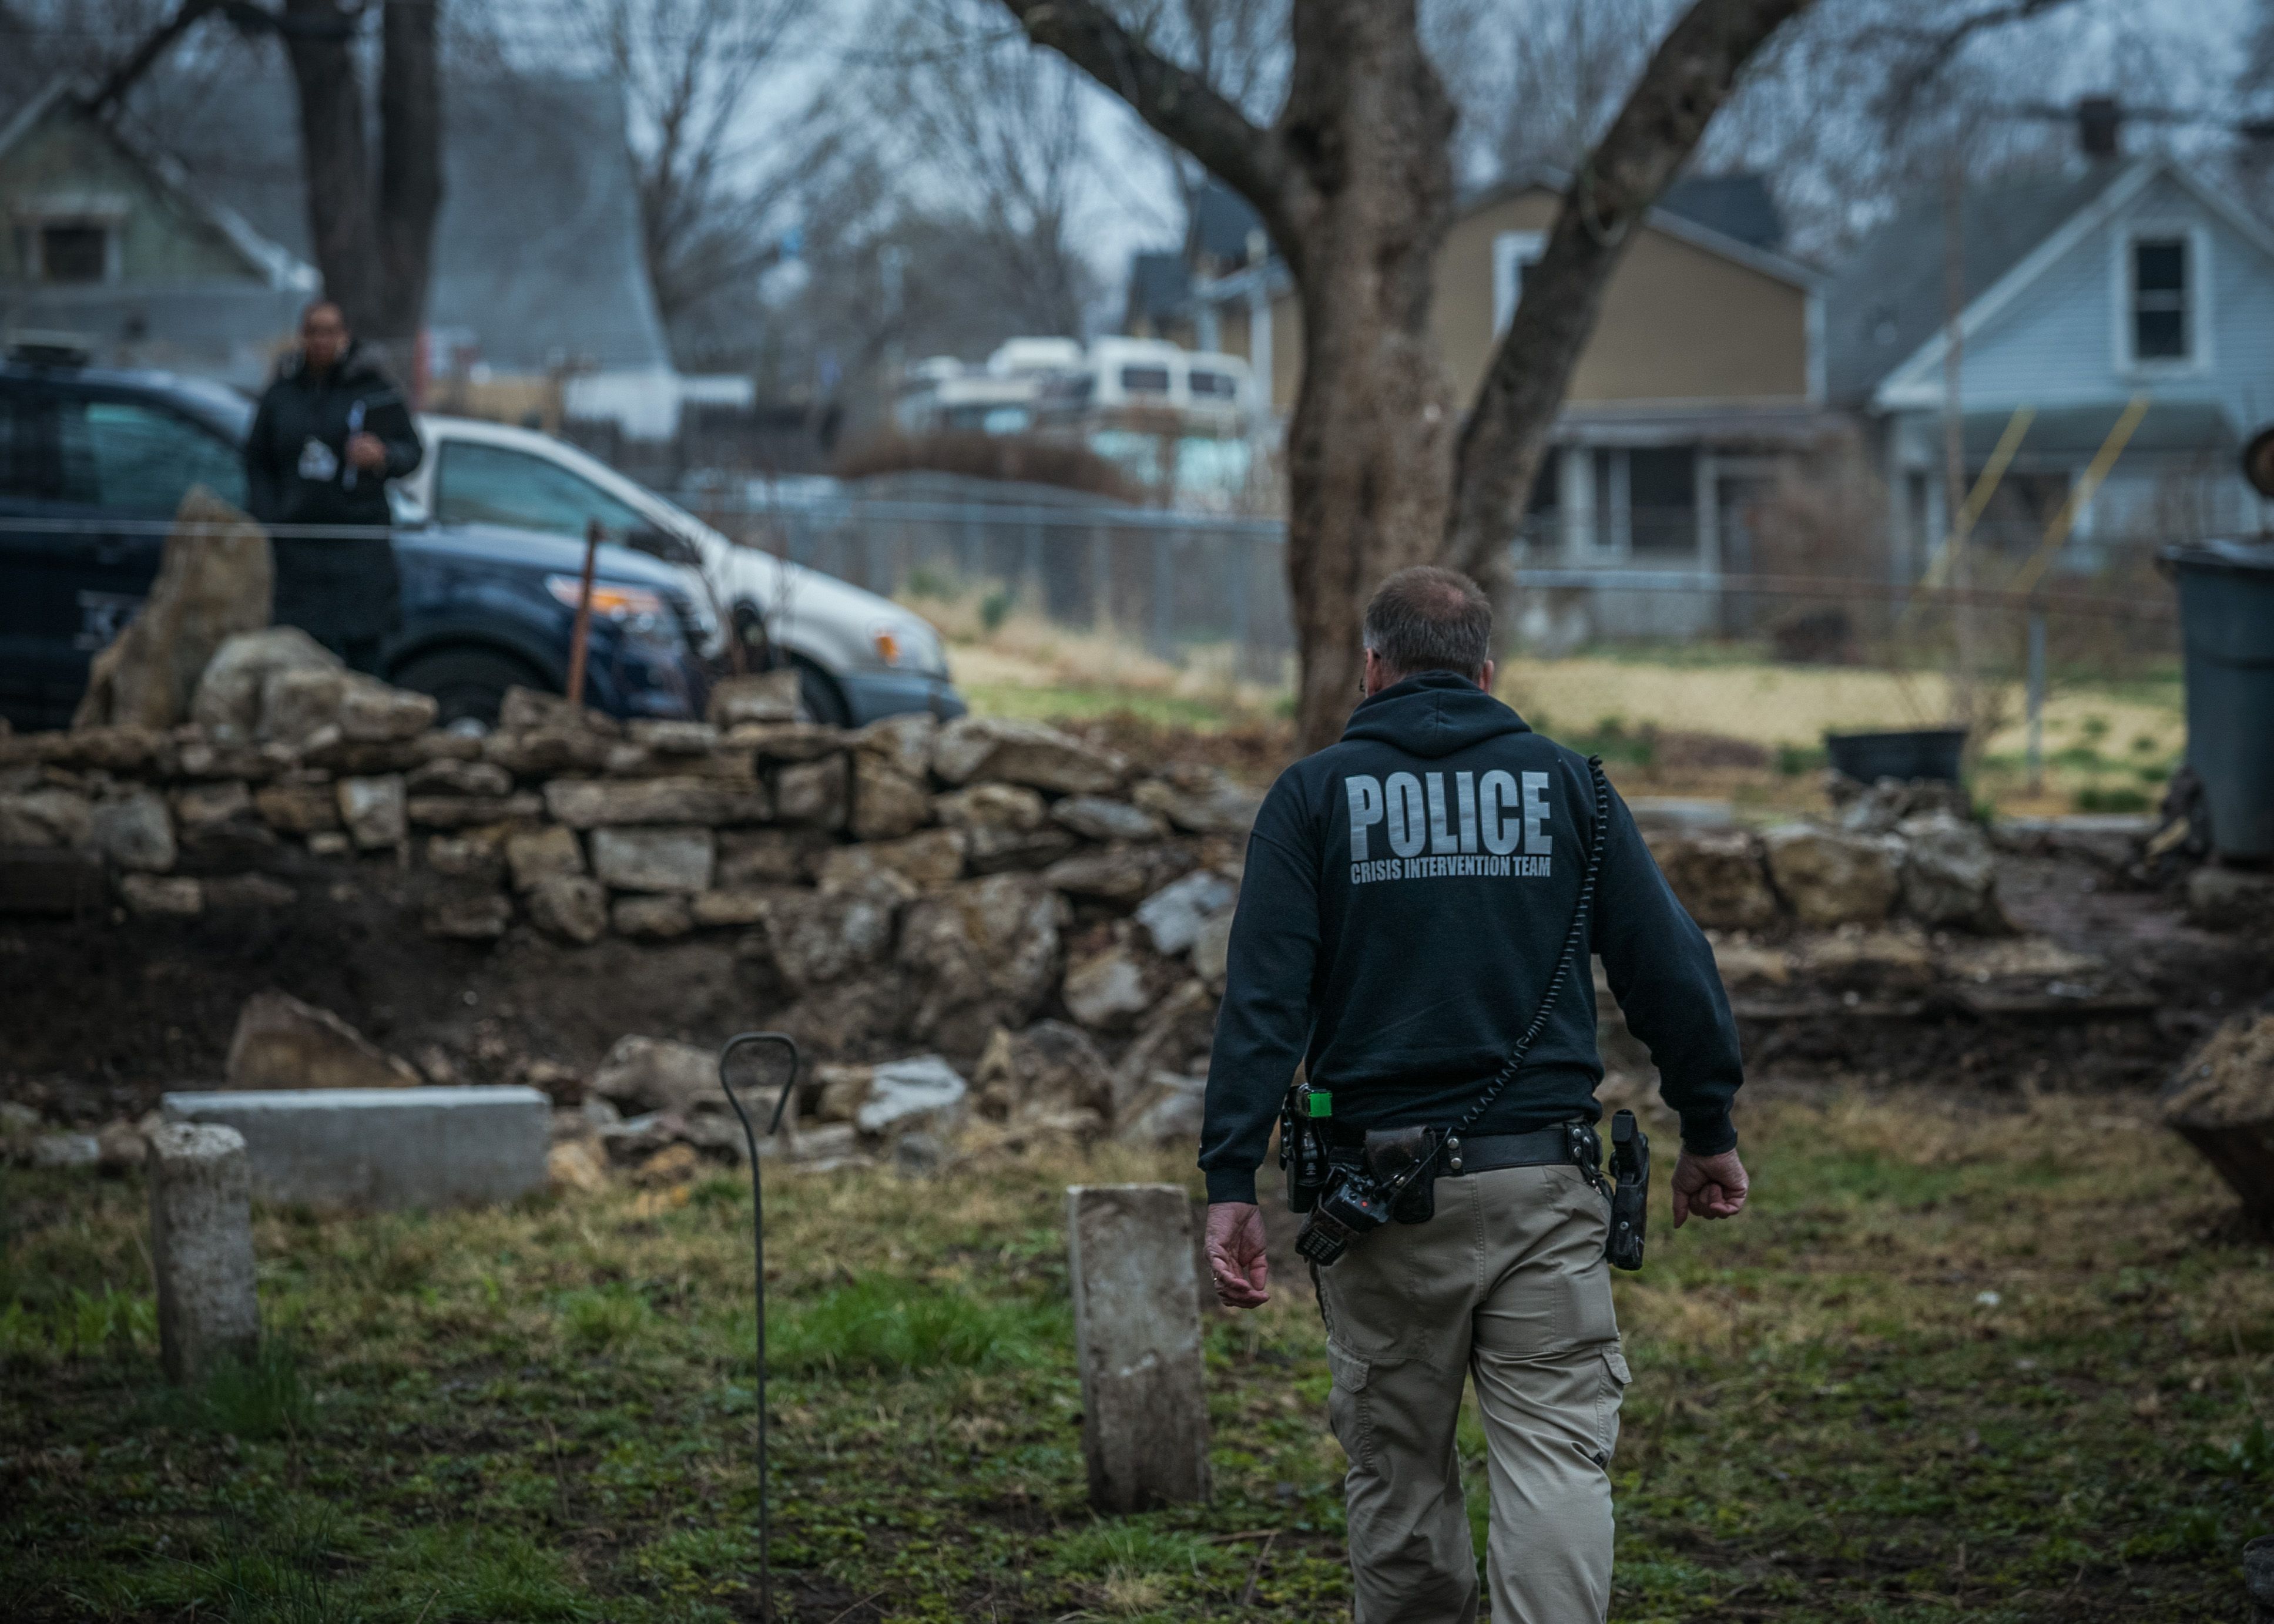 Kansas City, MO Police Officer Aric Anderson, who is part of the police crisis intervention team, looks for a homeless man with mental illness at an abandoned house he is known to stay at. Image by PBS Newshour. United States, 2018.